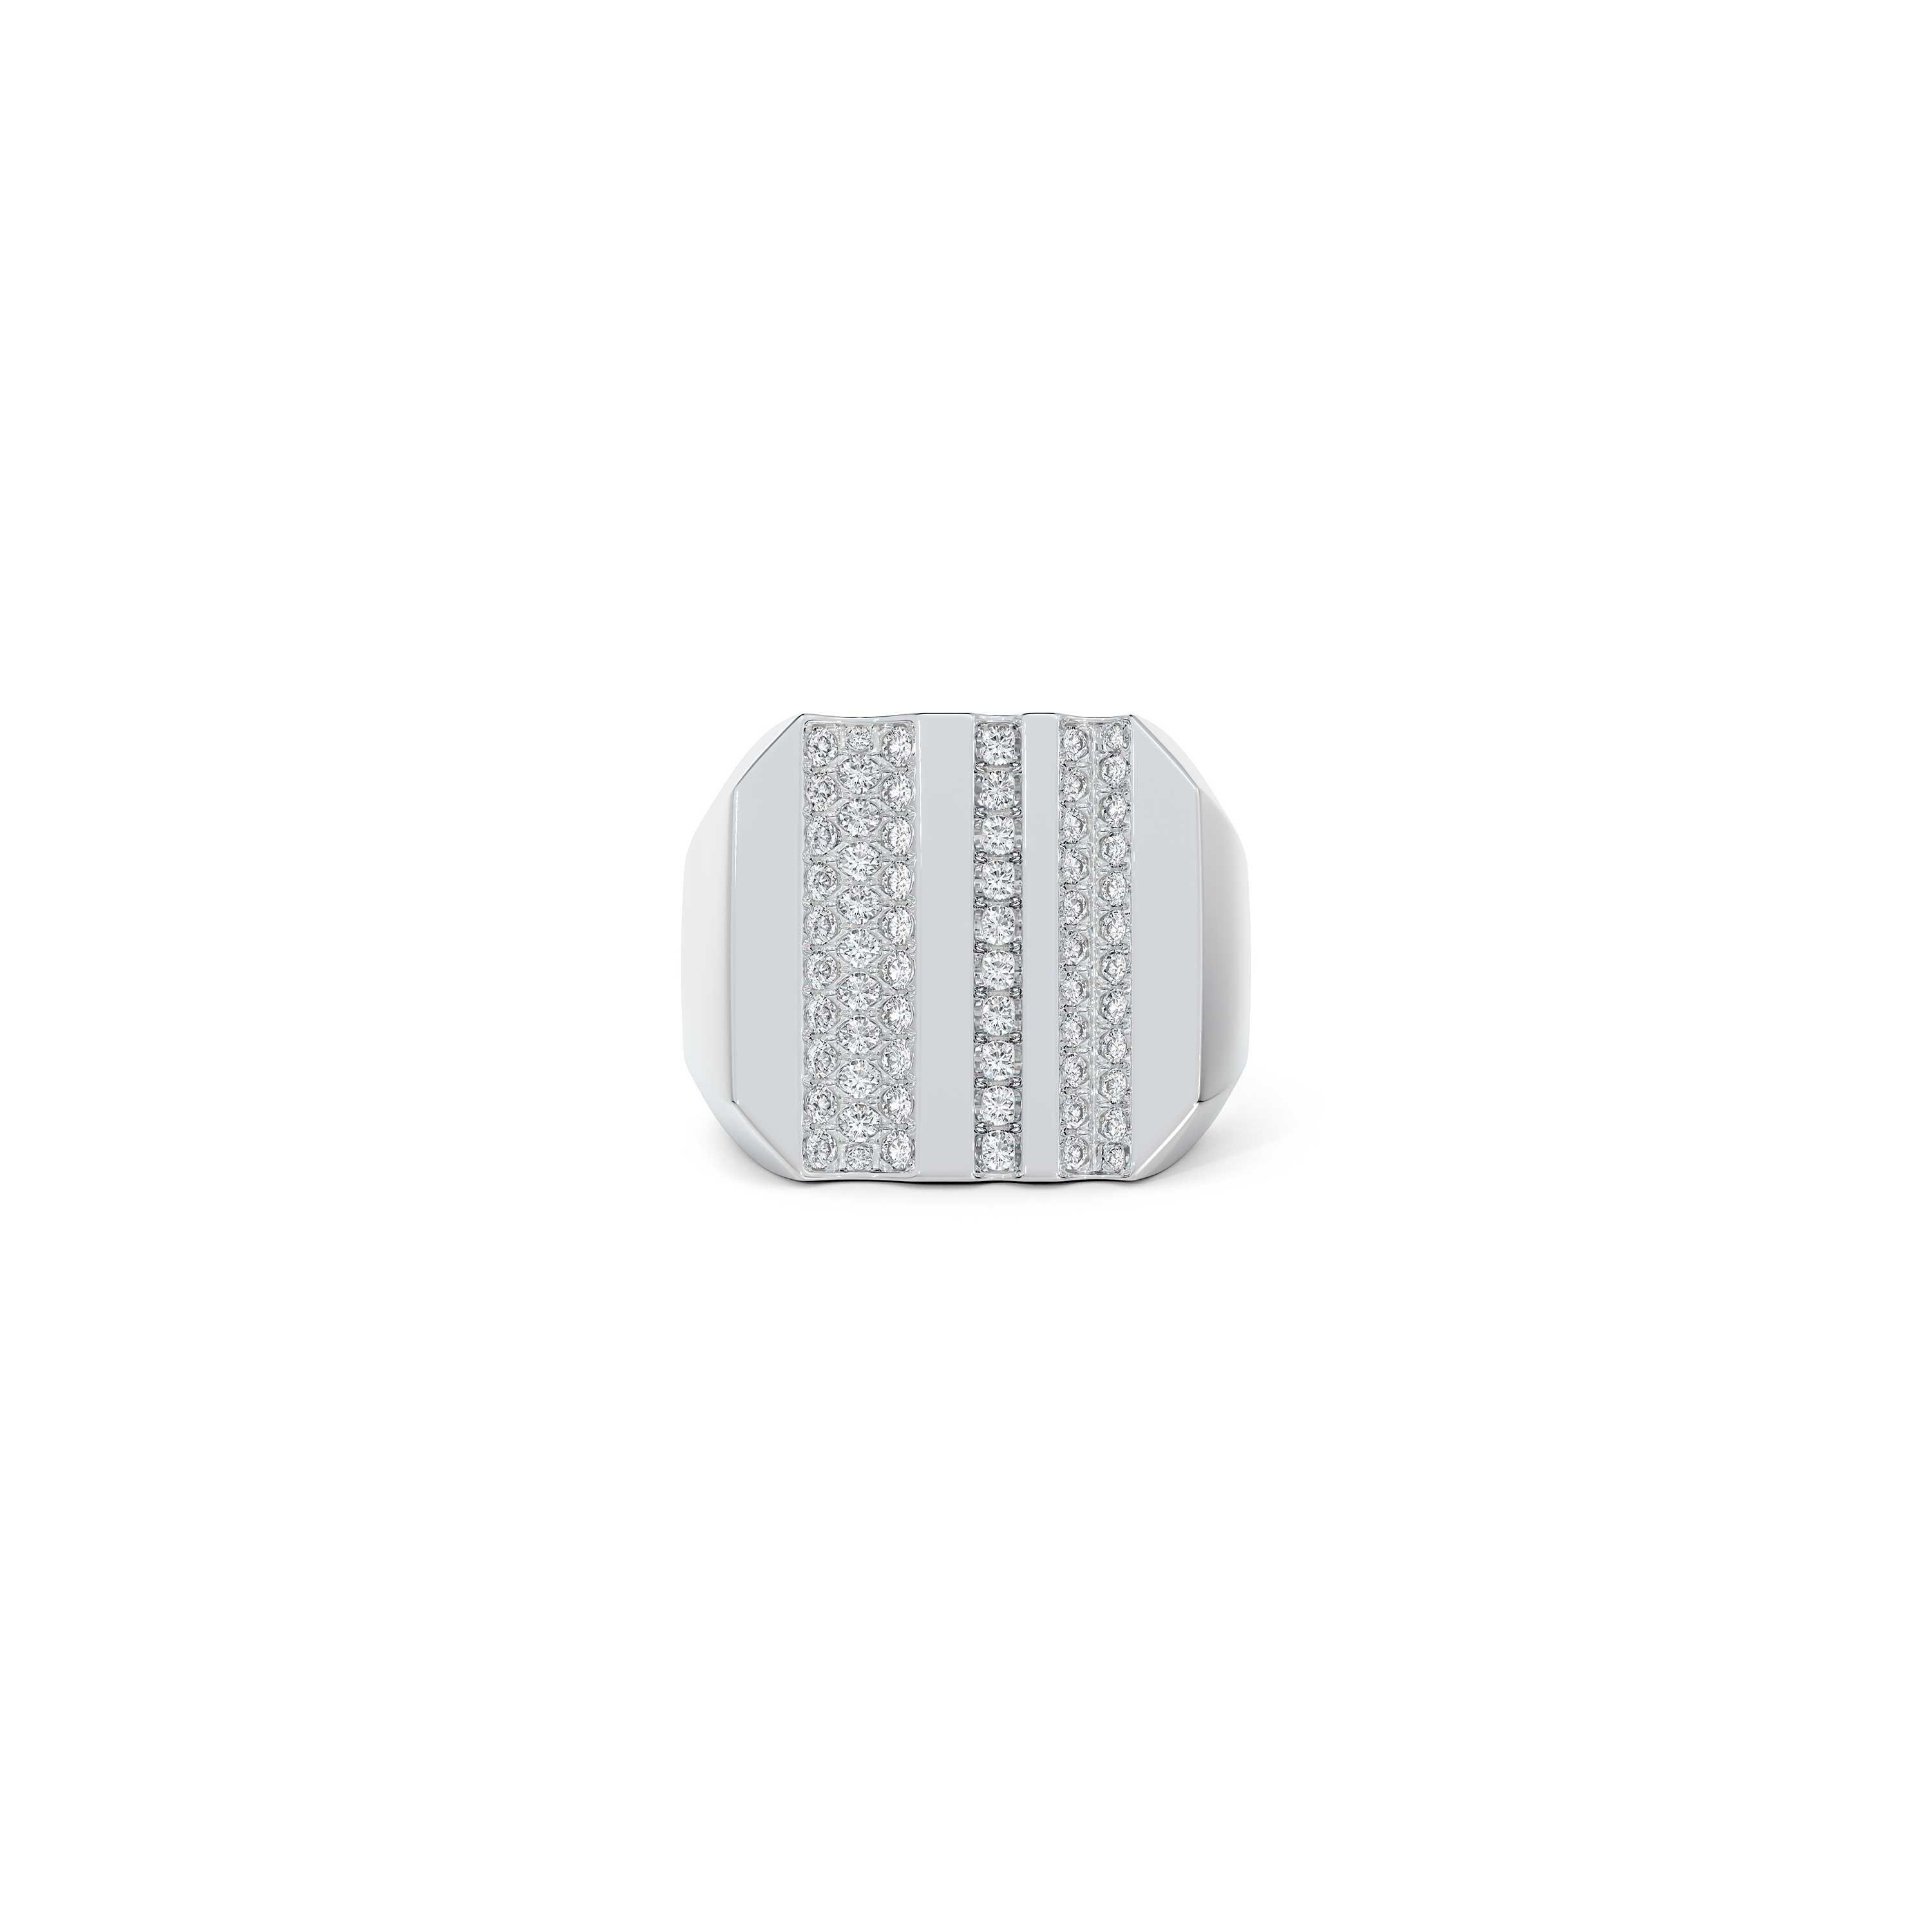 De Beers RVL signet Ring in white gold, image 1